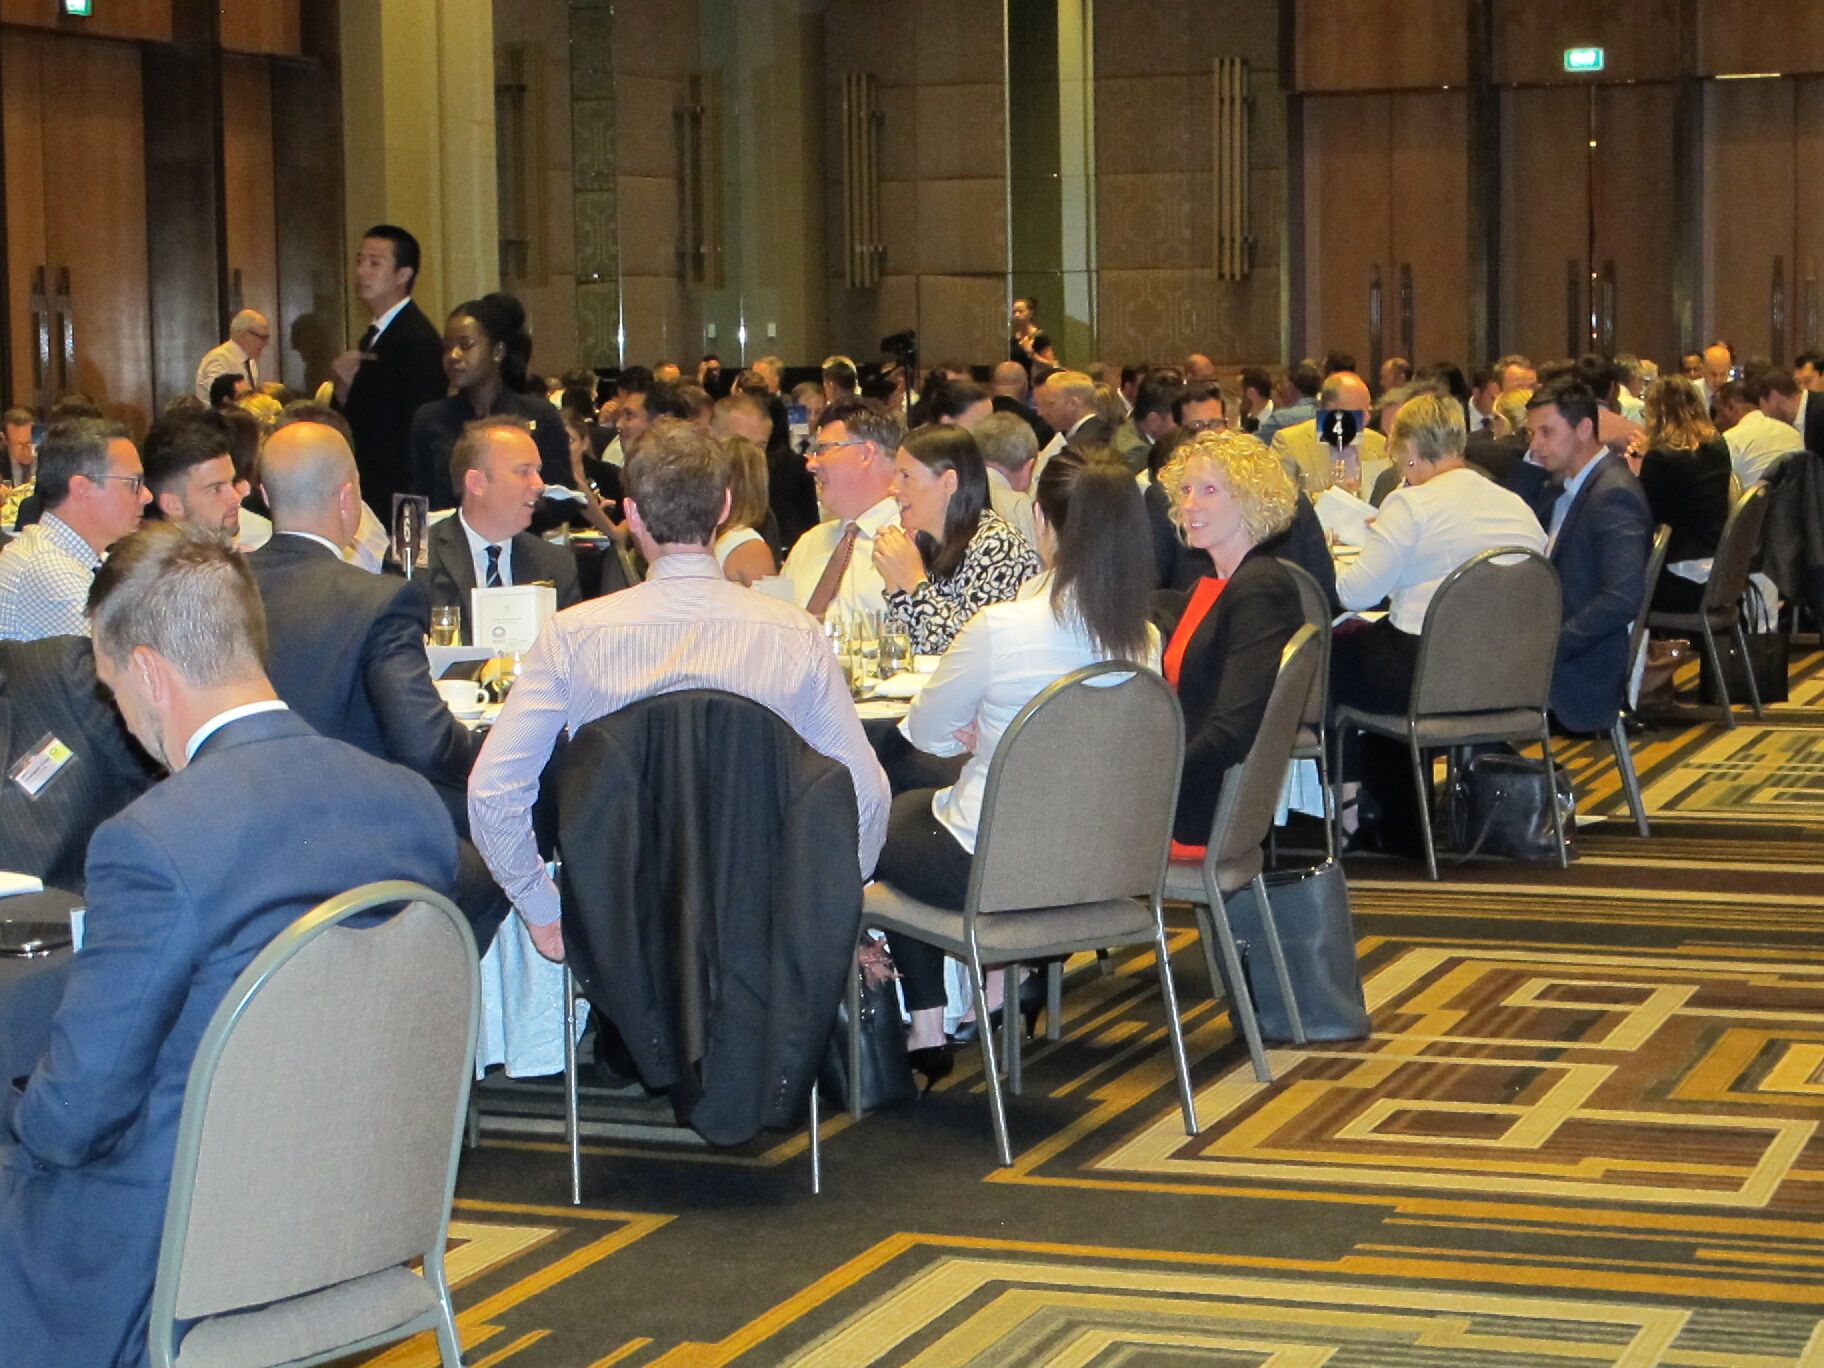 A small section of the large audience attending the 2016 MDRT Down Under Tour